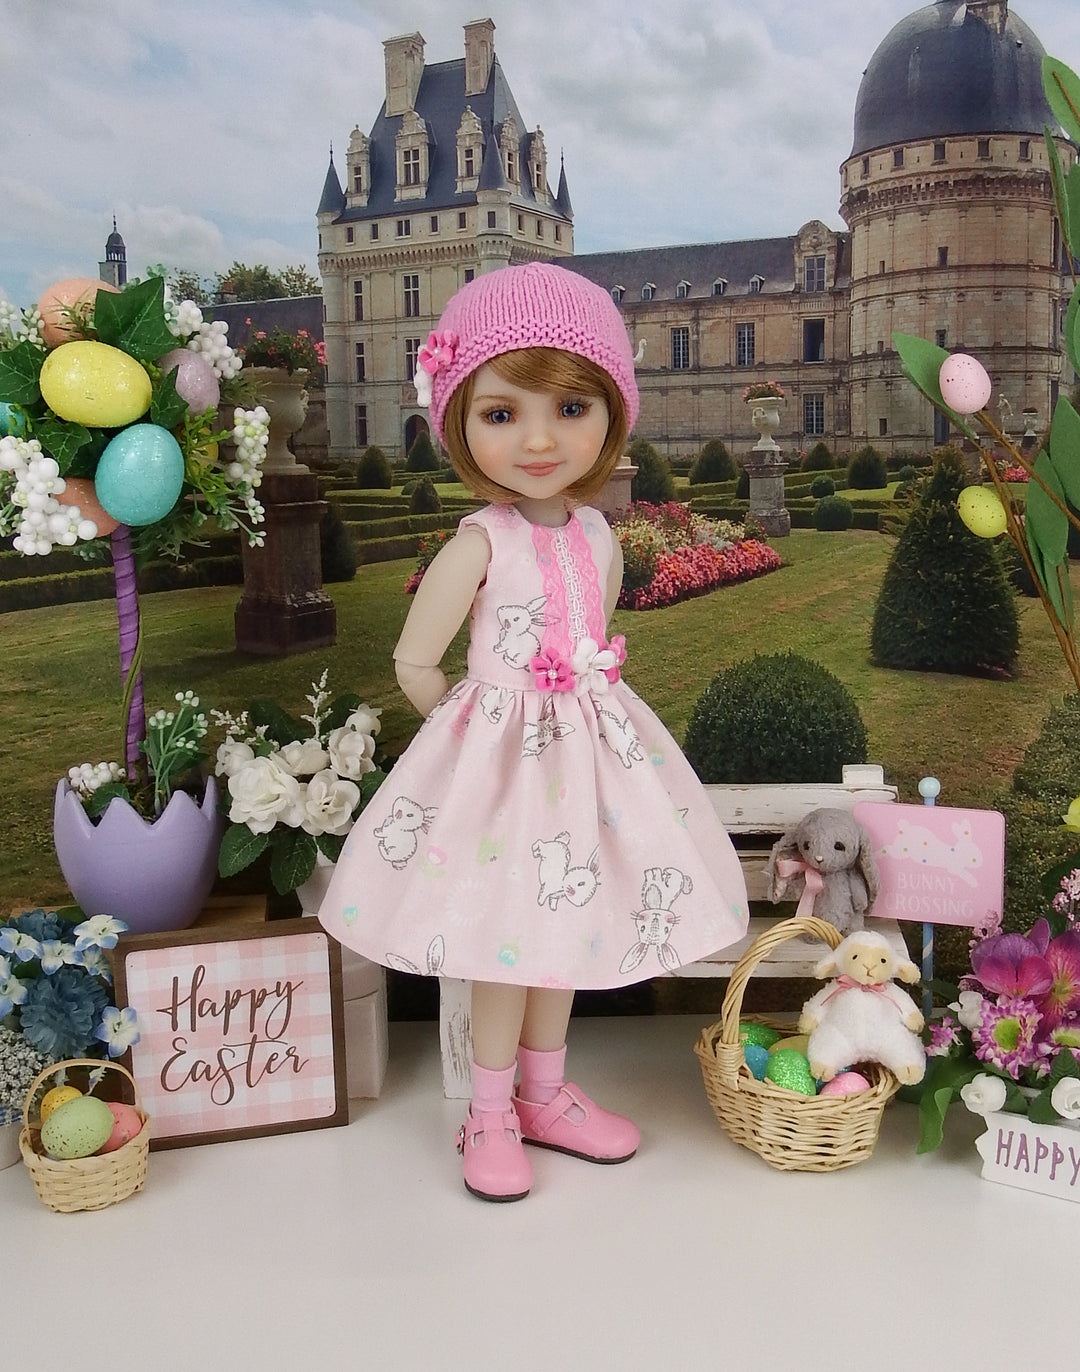 Precious Bunny - dress and hat with shoes for Ruby Red Fashion Friends doll